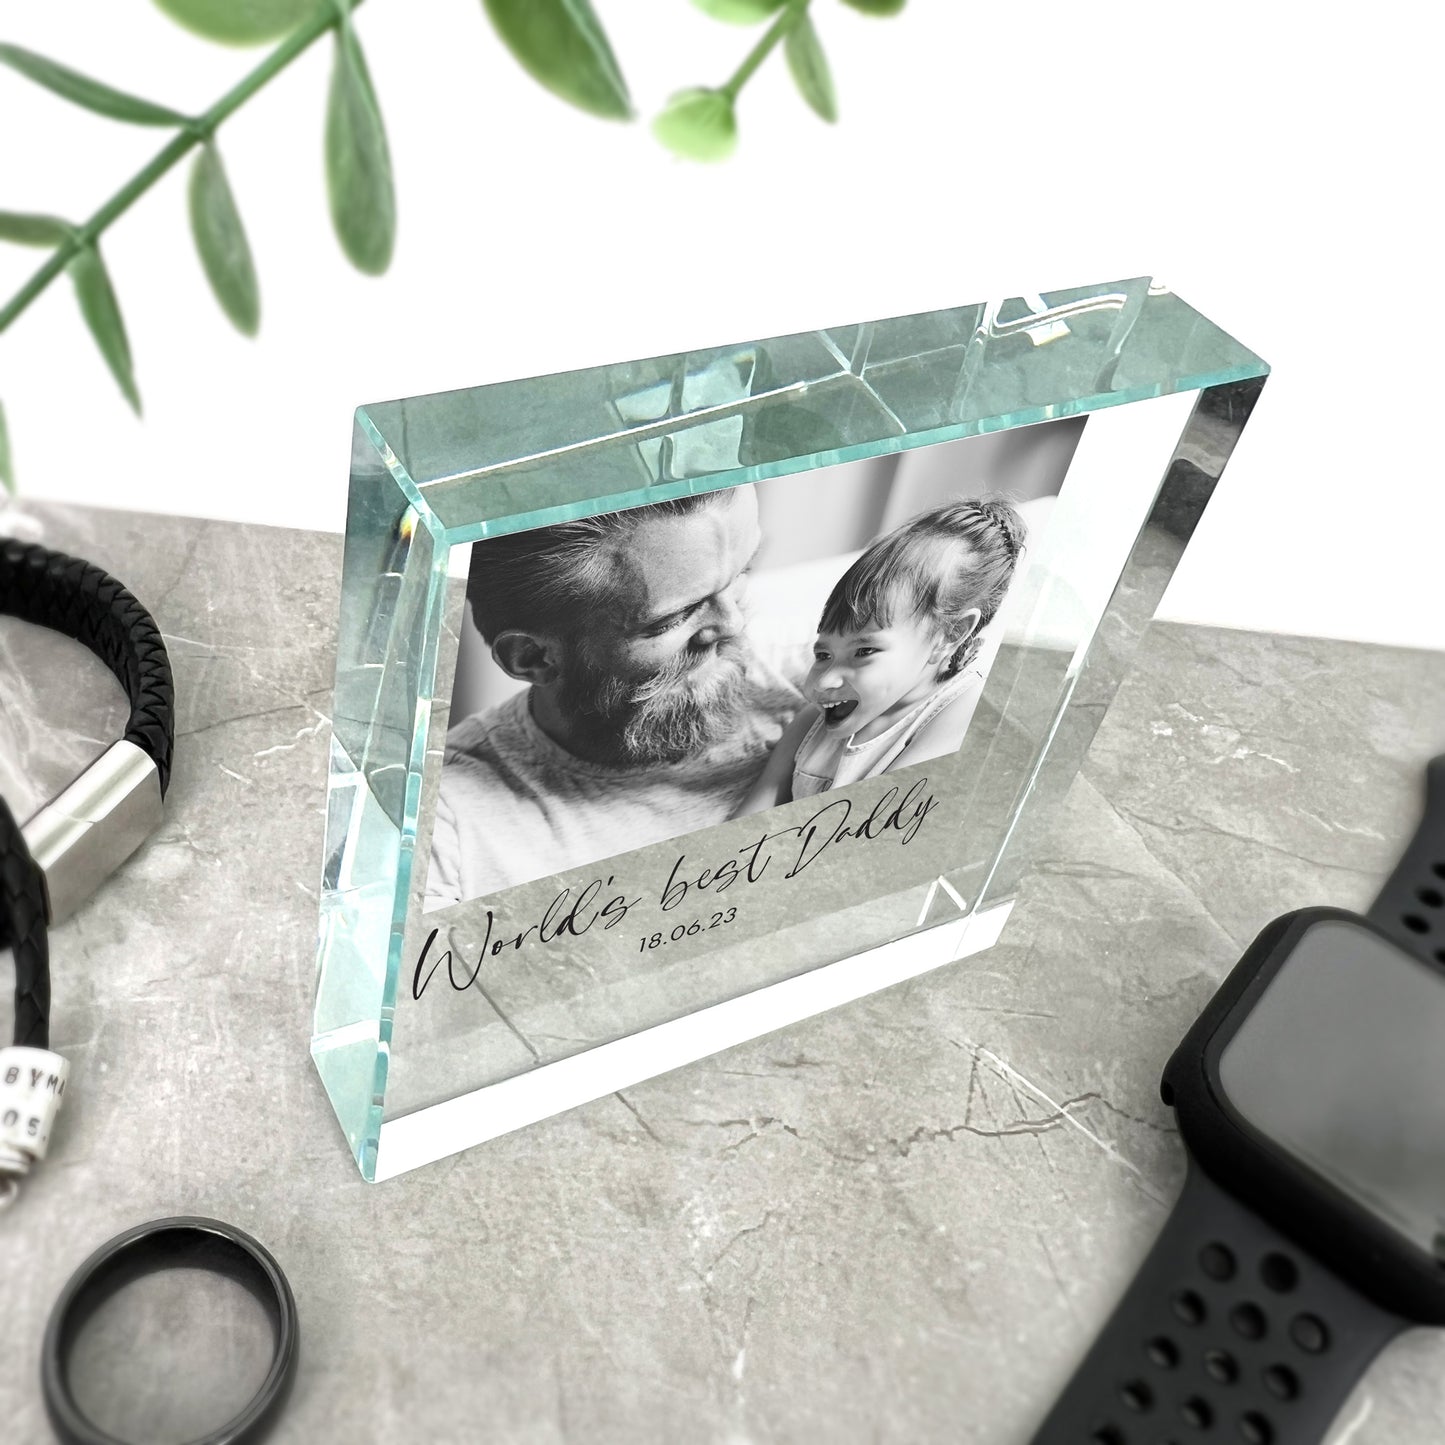 Personalised Free Text Father's Day Photo Crystal Token | Acrylic Block